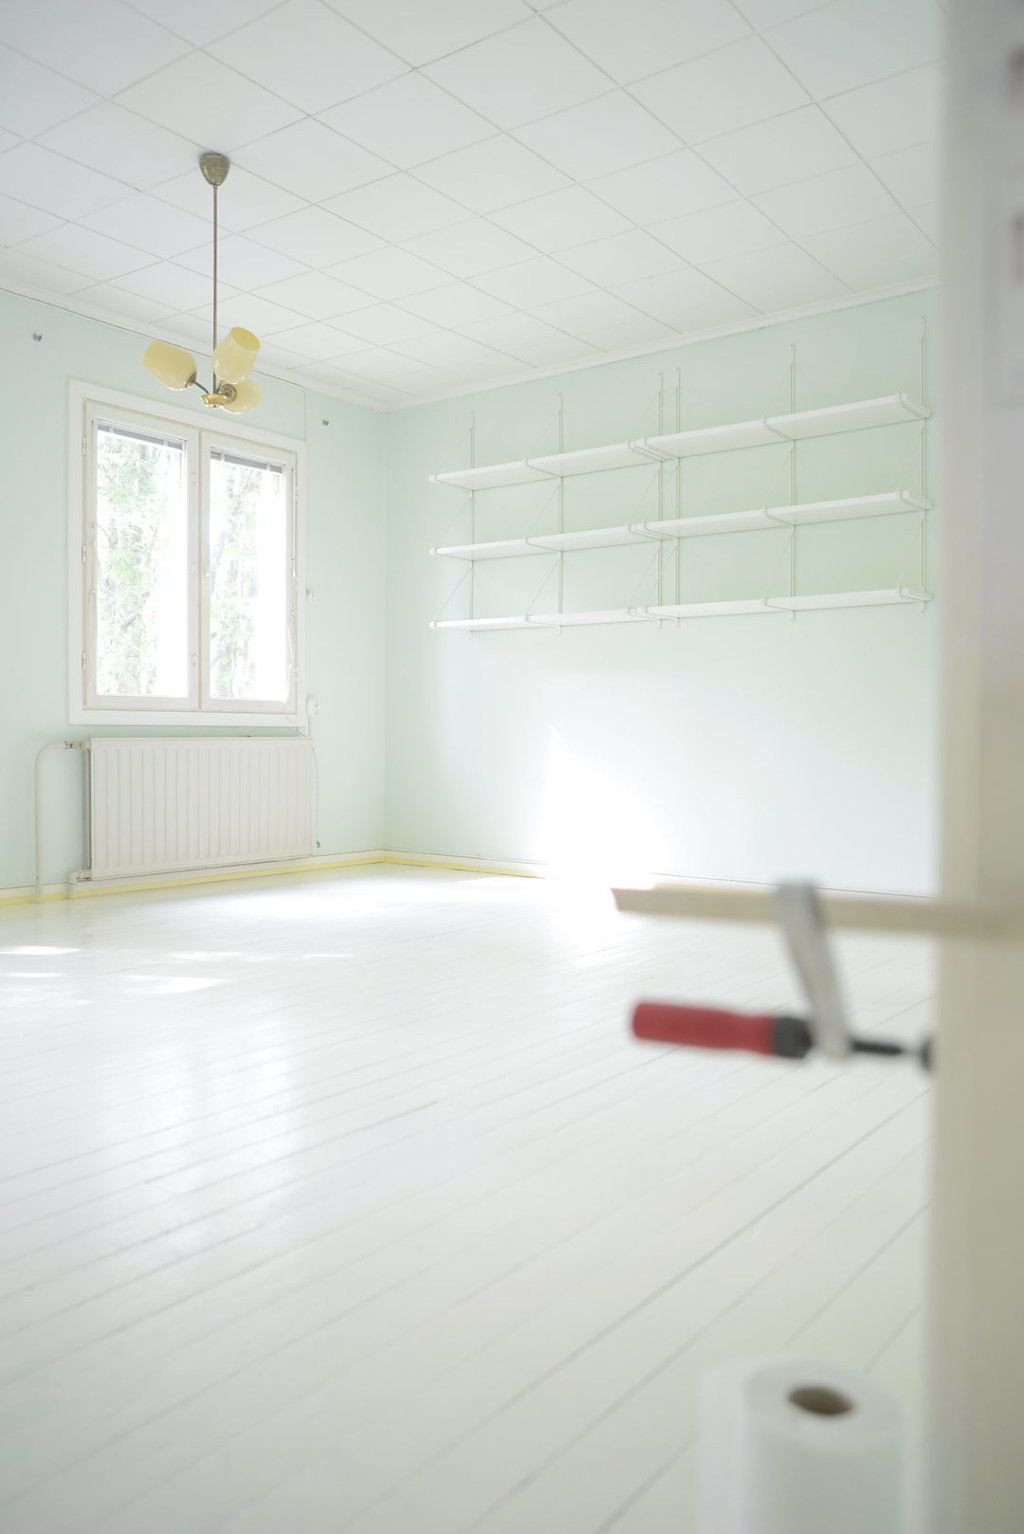 Painting Wooden Floors